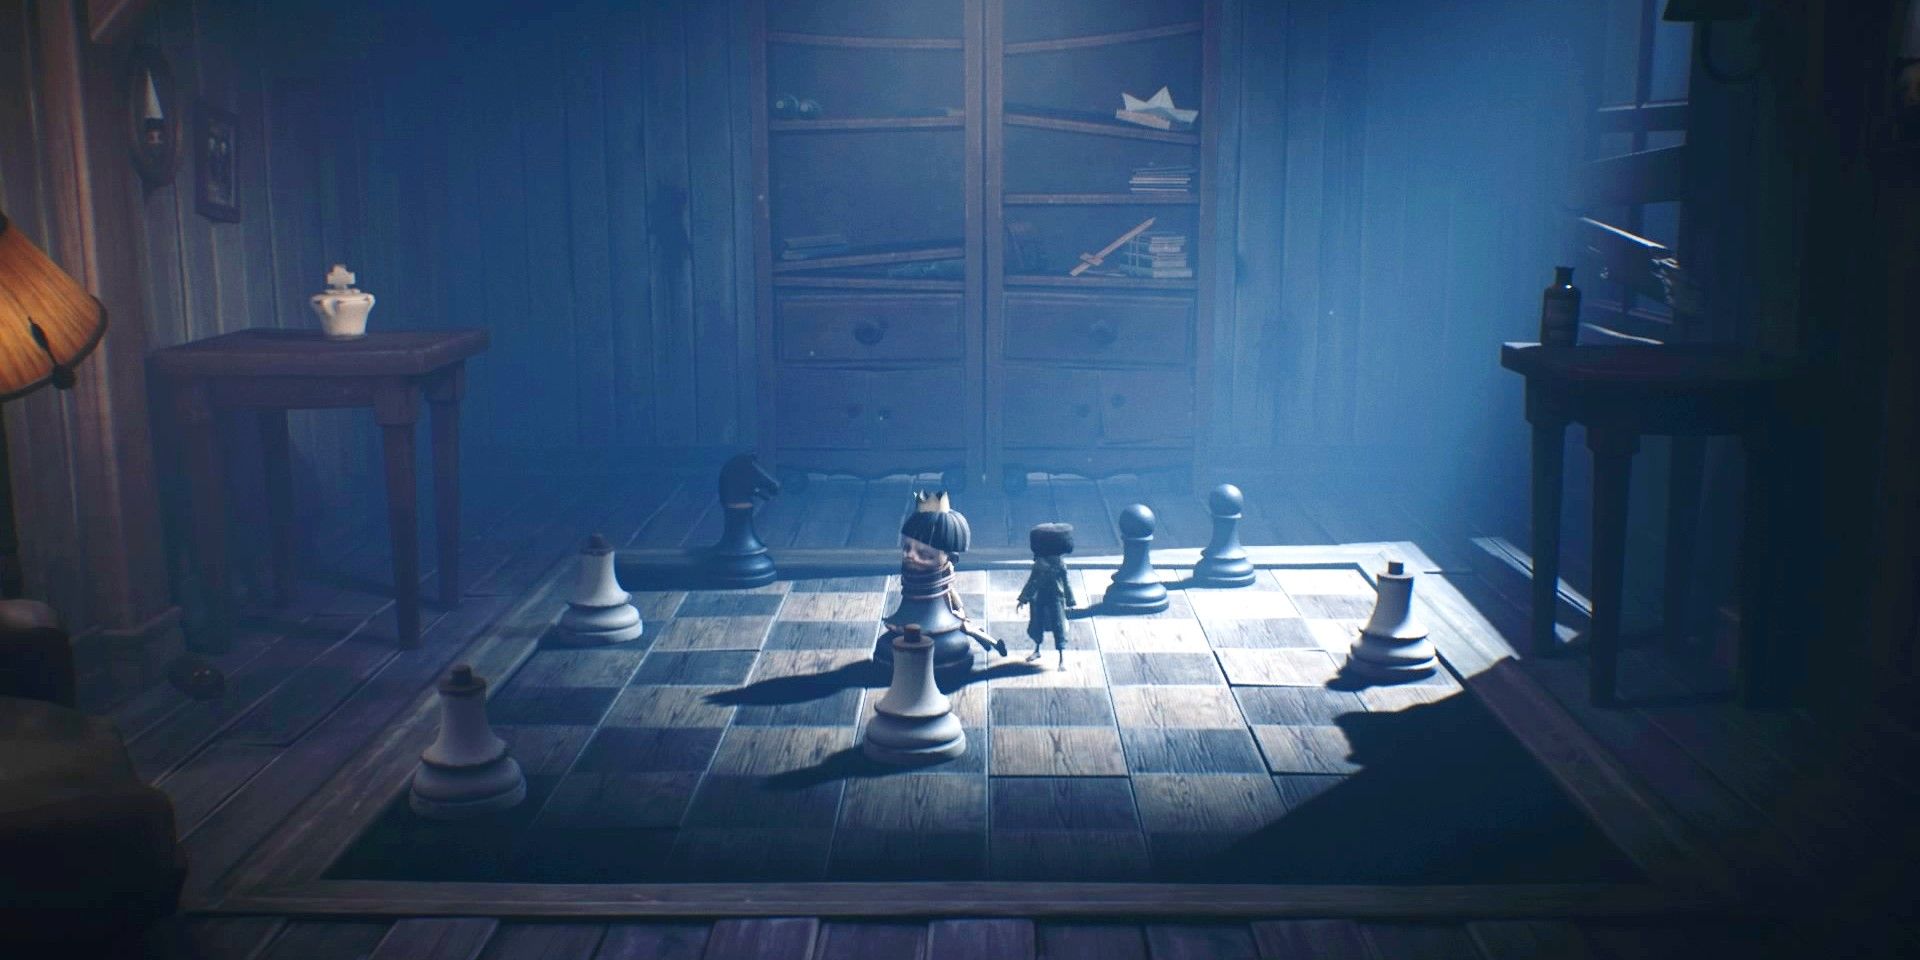 will there be a little nightmares 3